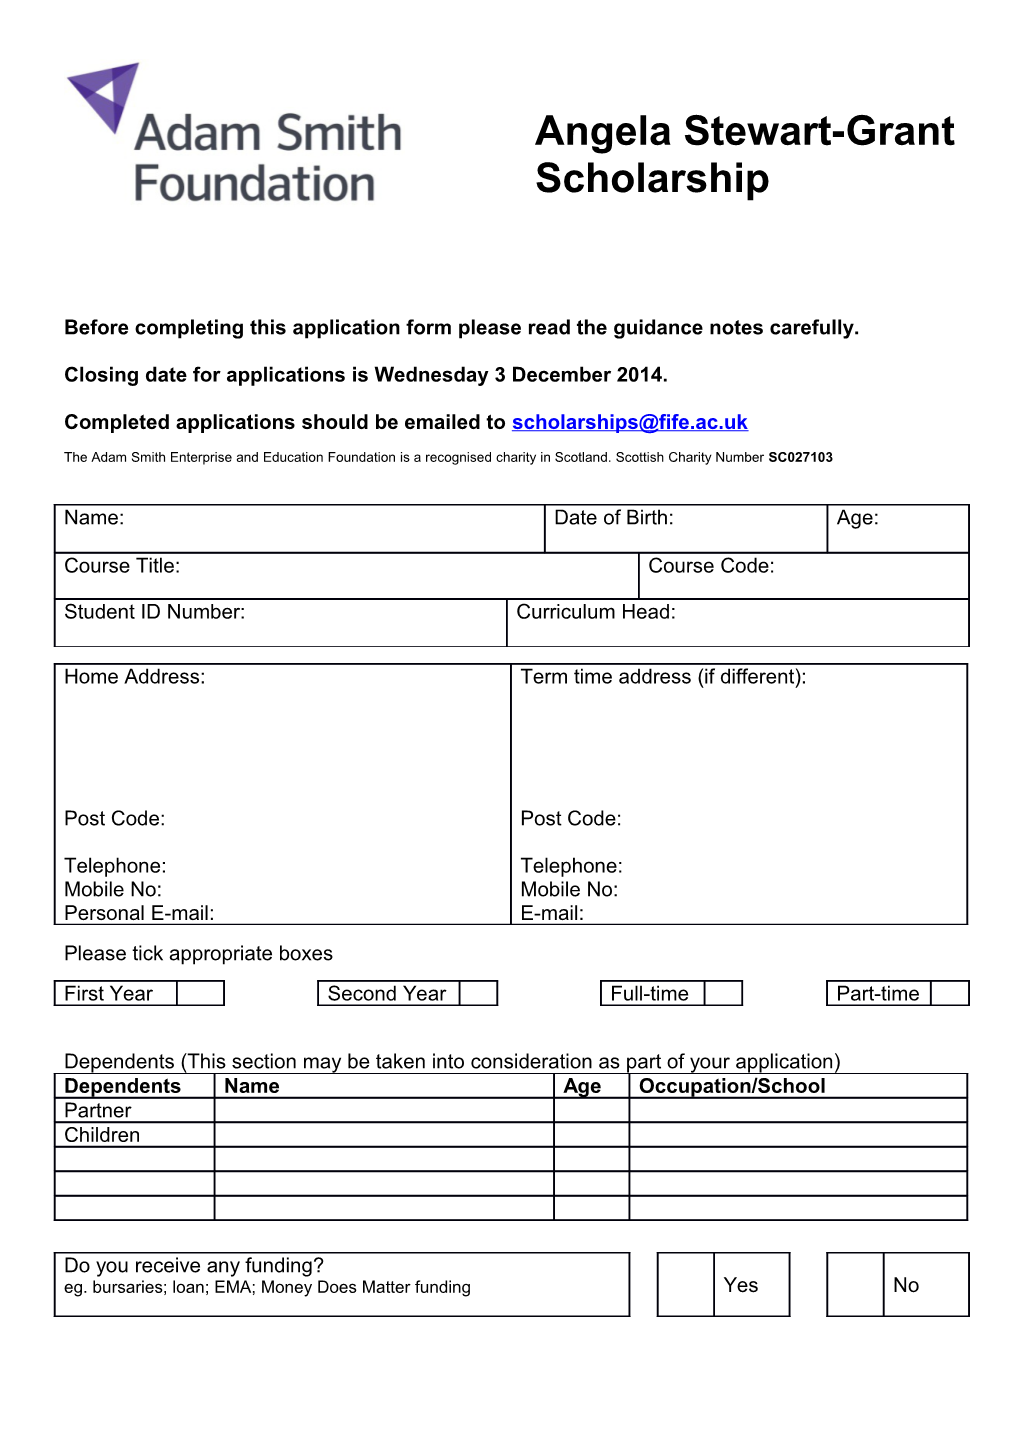 ASG Application Form 2012 13